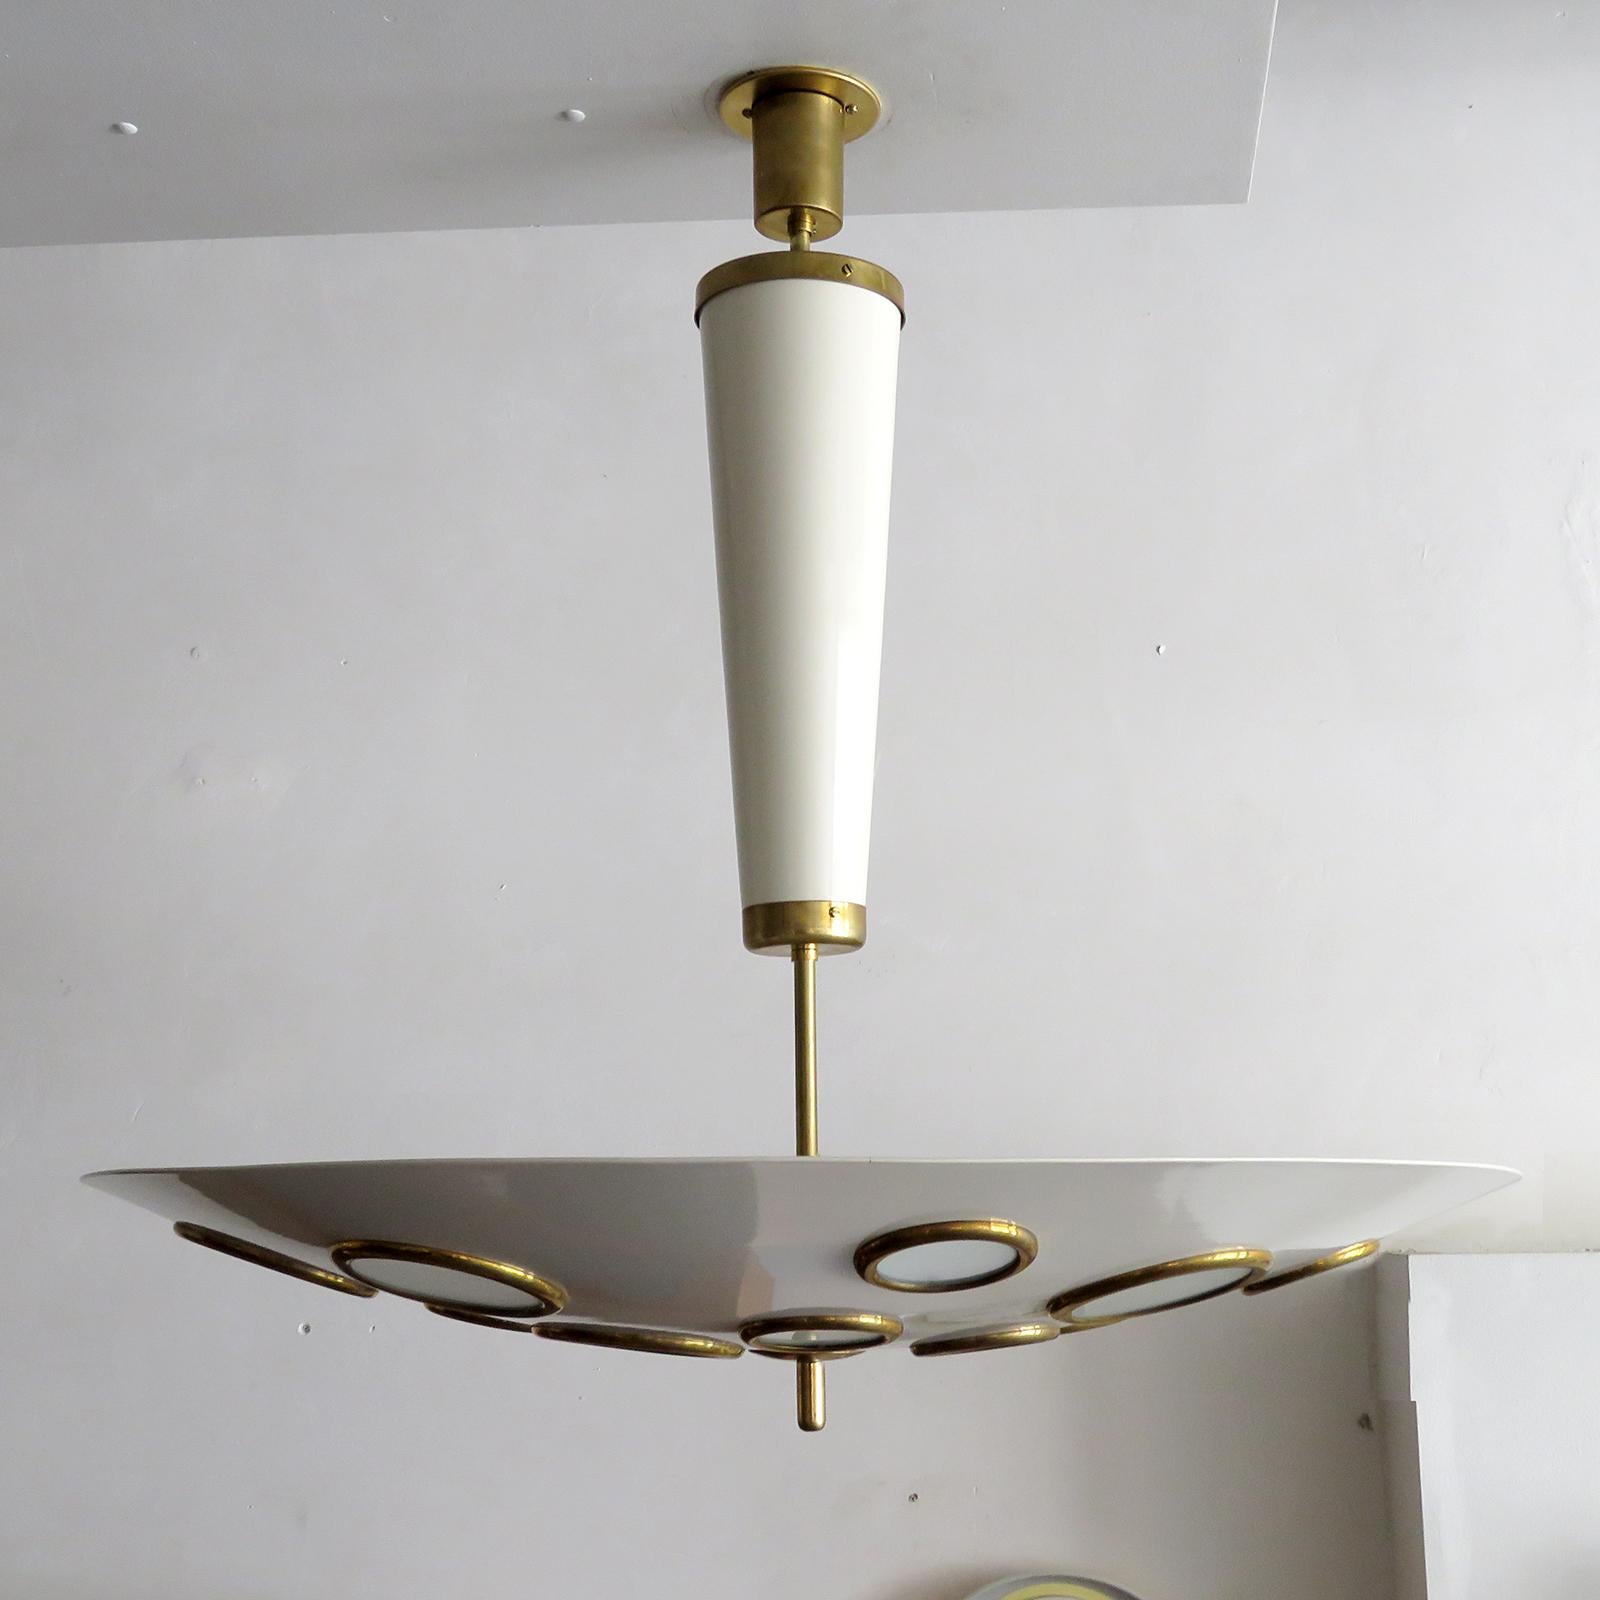 Stunning Italian pendant lights by Lumen Milano, 1950 in brass and egg shell colored enameled metal, the large scale suspended circular shade is perforated with brass rimmed frosted glass diffusers of various sizes, wired for US standards or